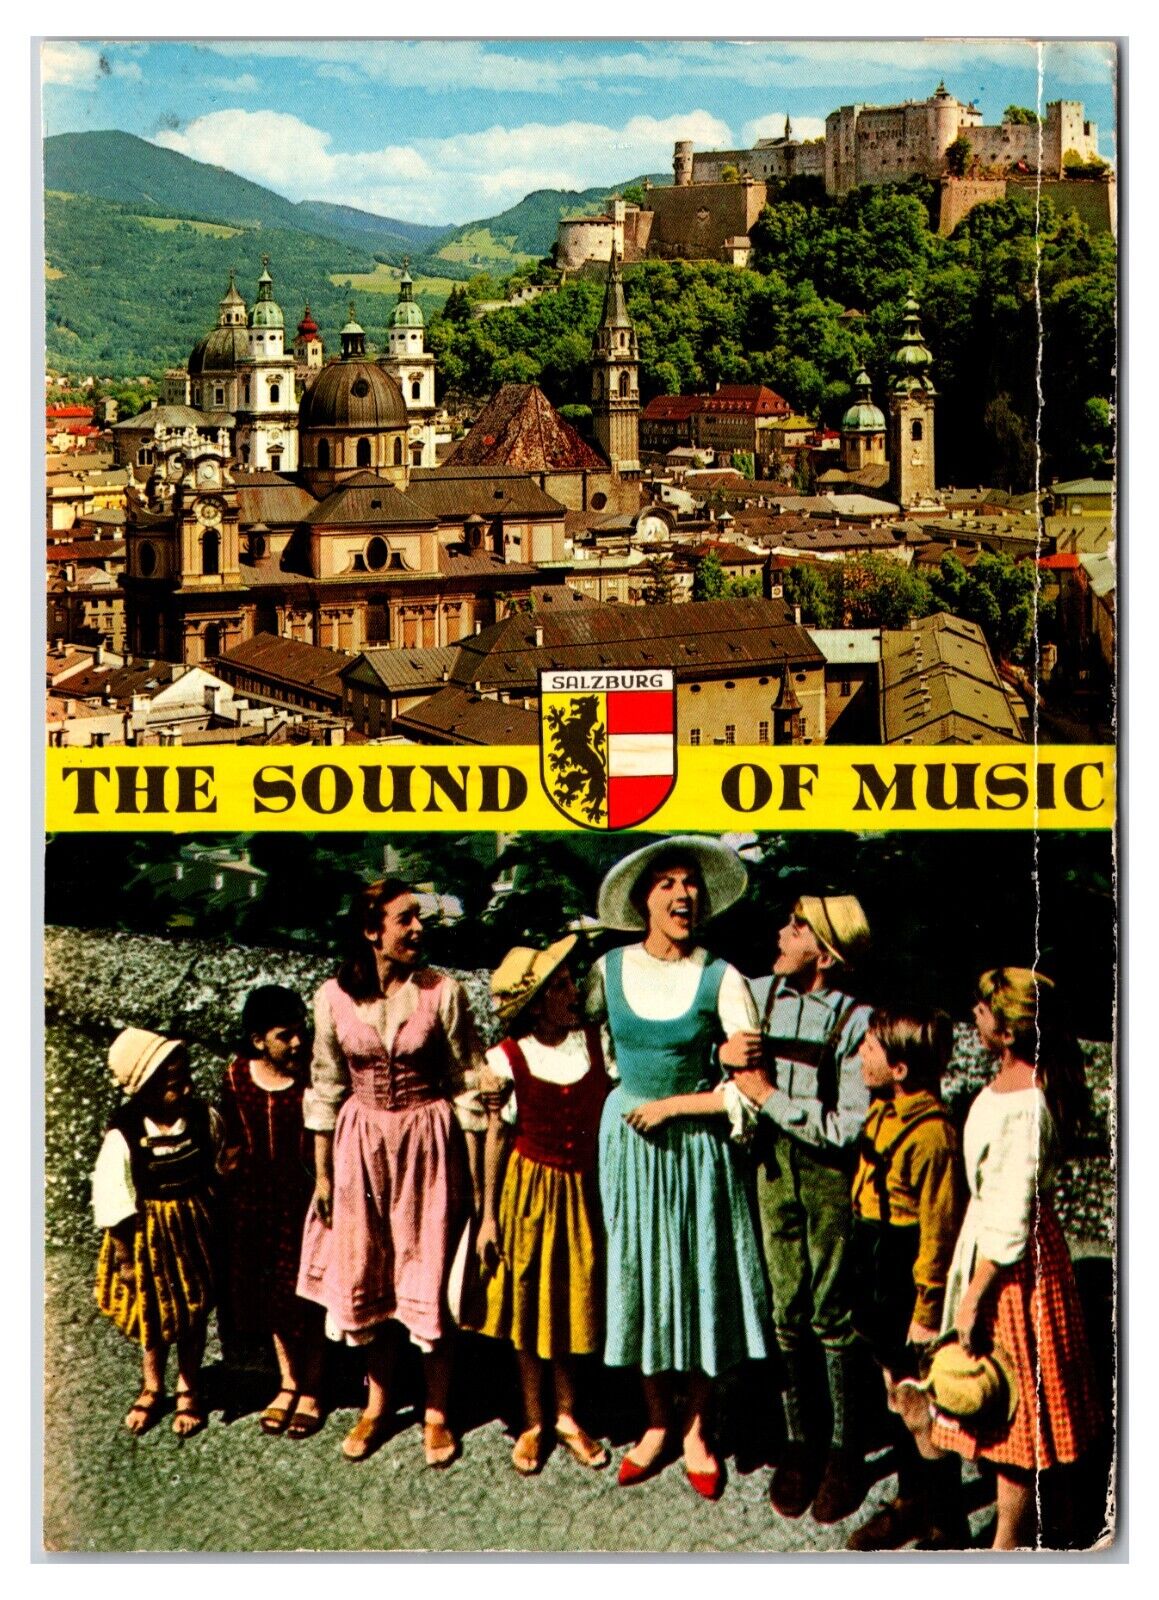 1970s- The Trapp Family / Sound of Music - Salzburg, Austria Postcard (UnPosted)